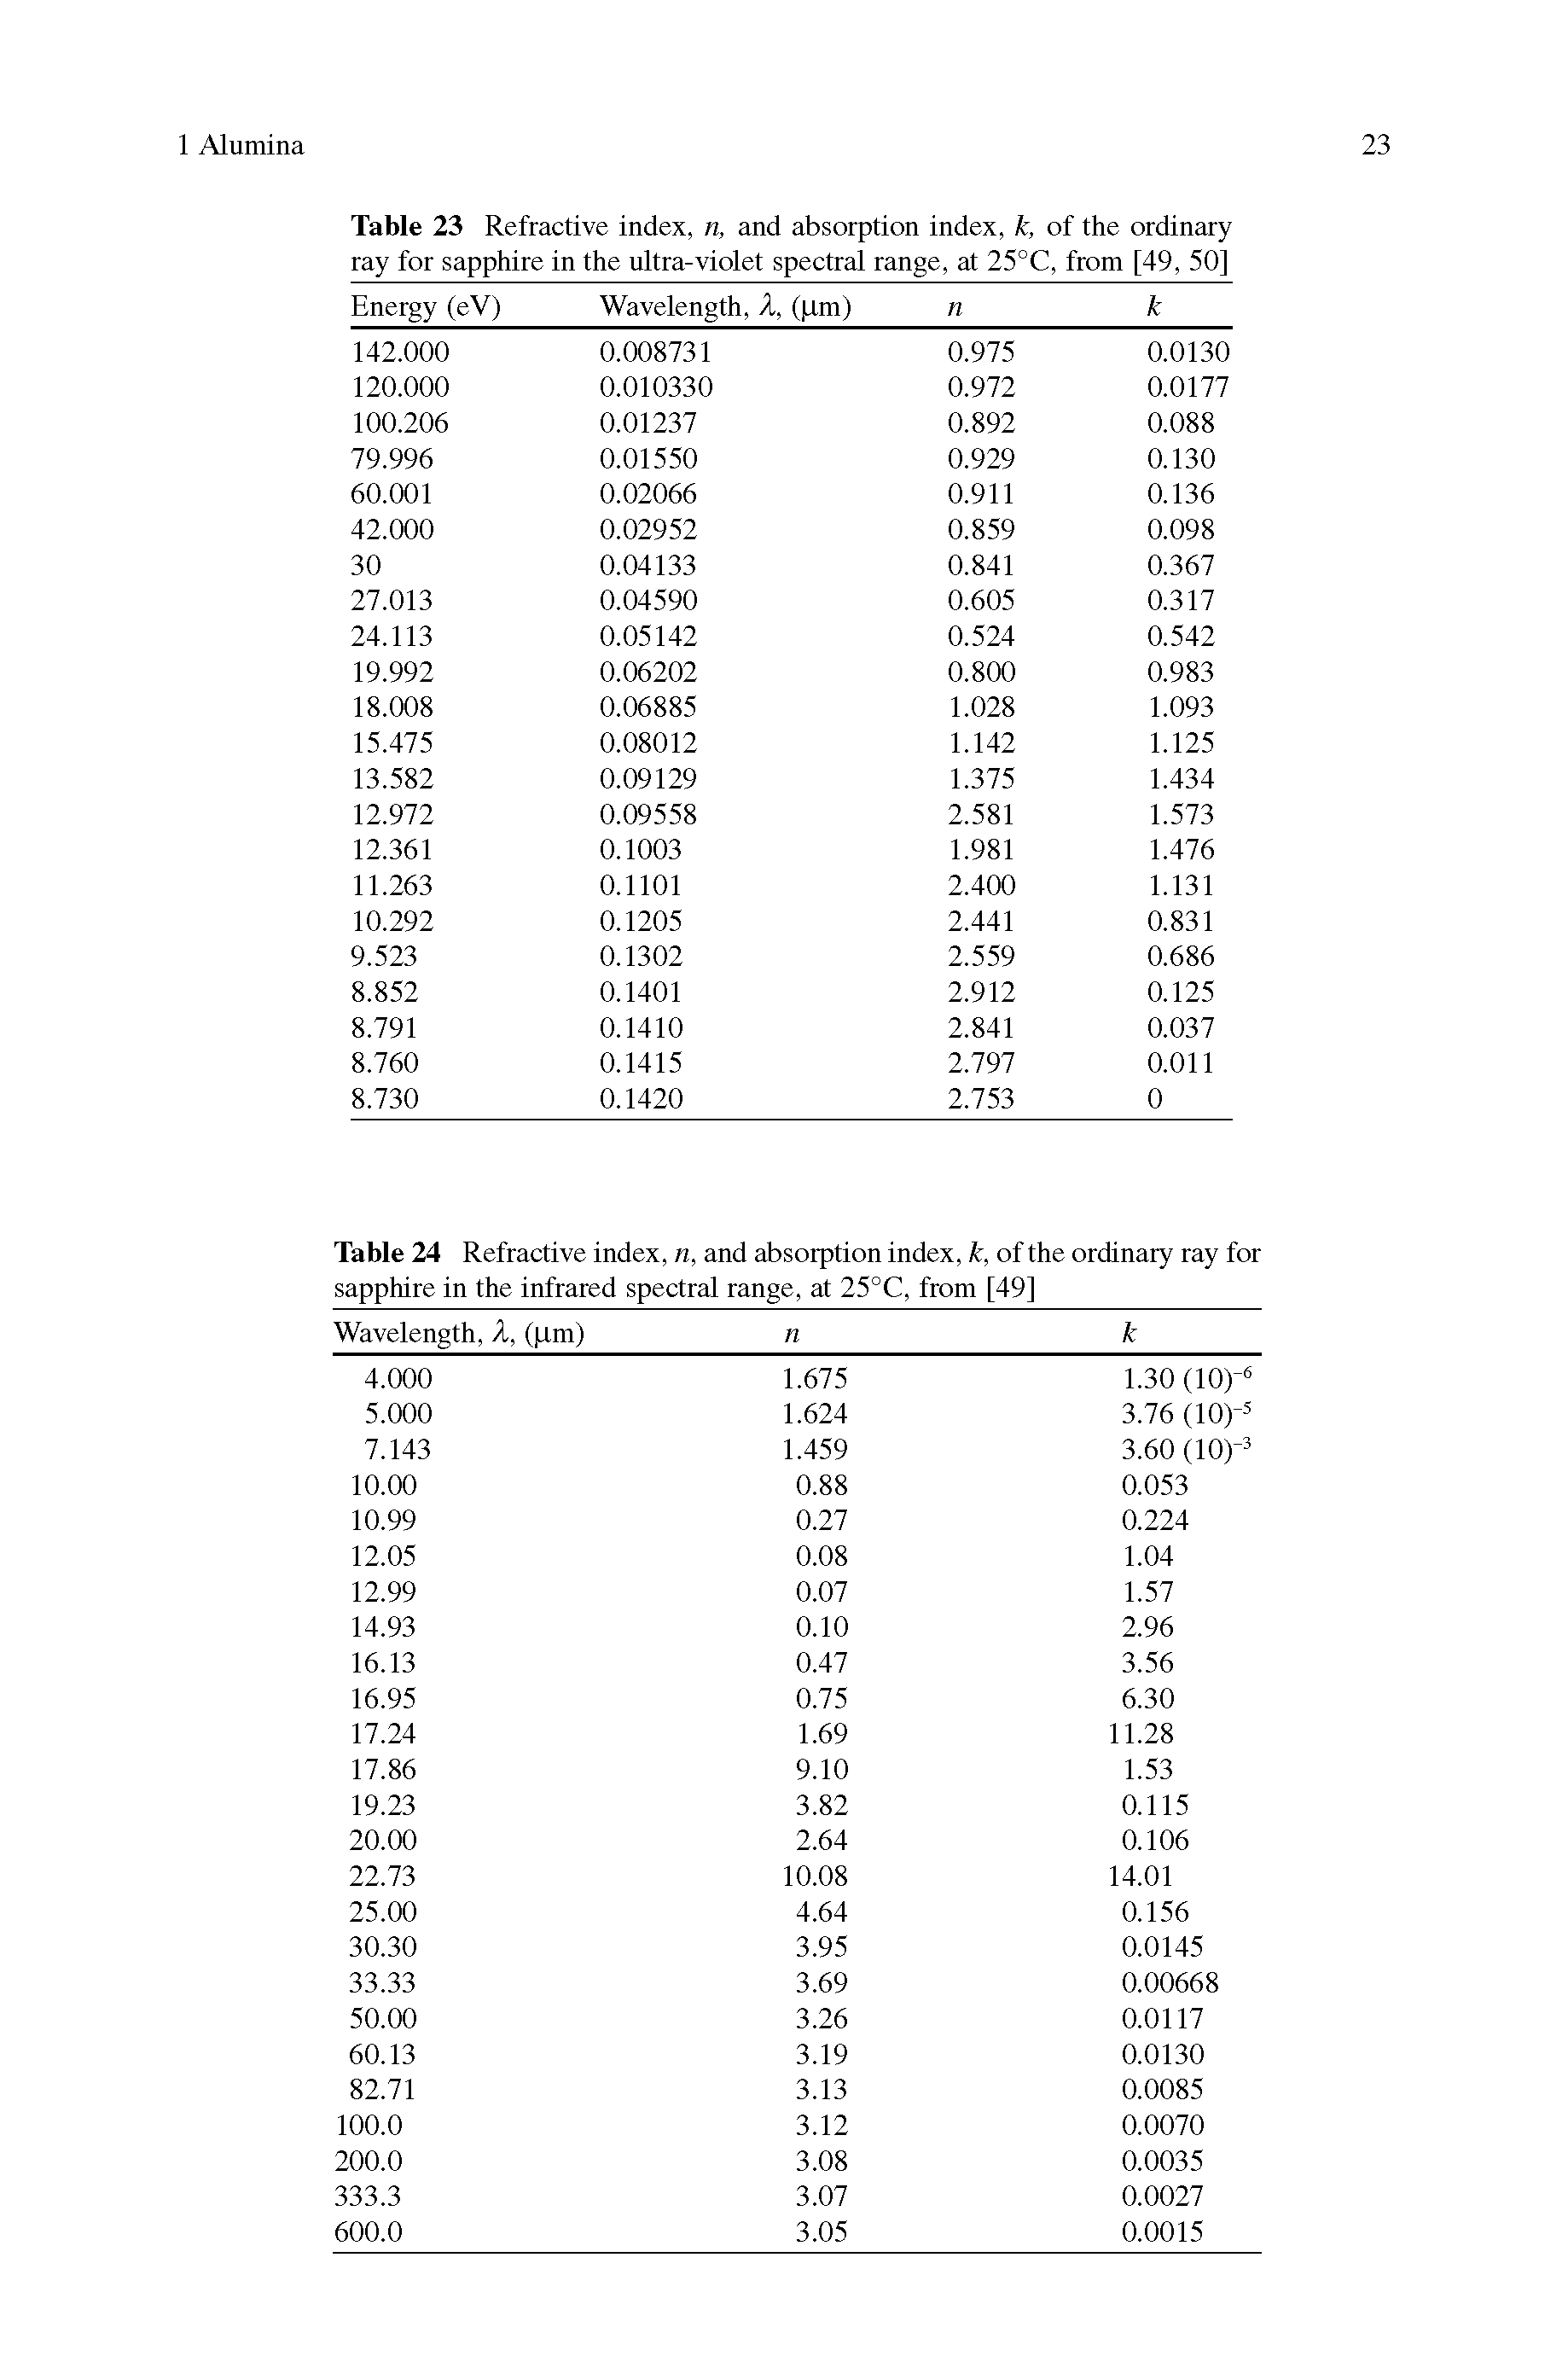 Table 23 Refractive index, n, and absorption index, k, of the ordinary ray for sapphire in the ultra-violet spectral range, at 25°C, from [49, 50]...